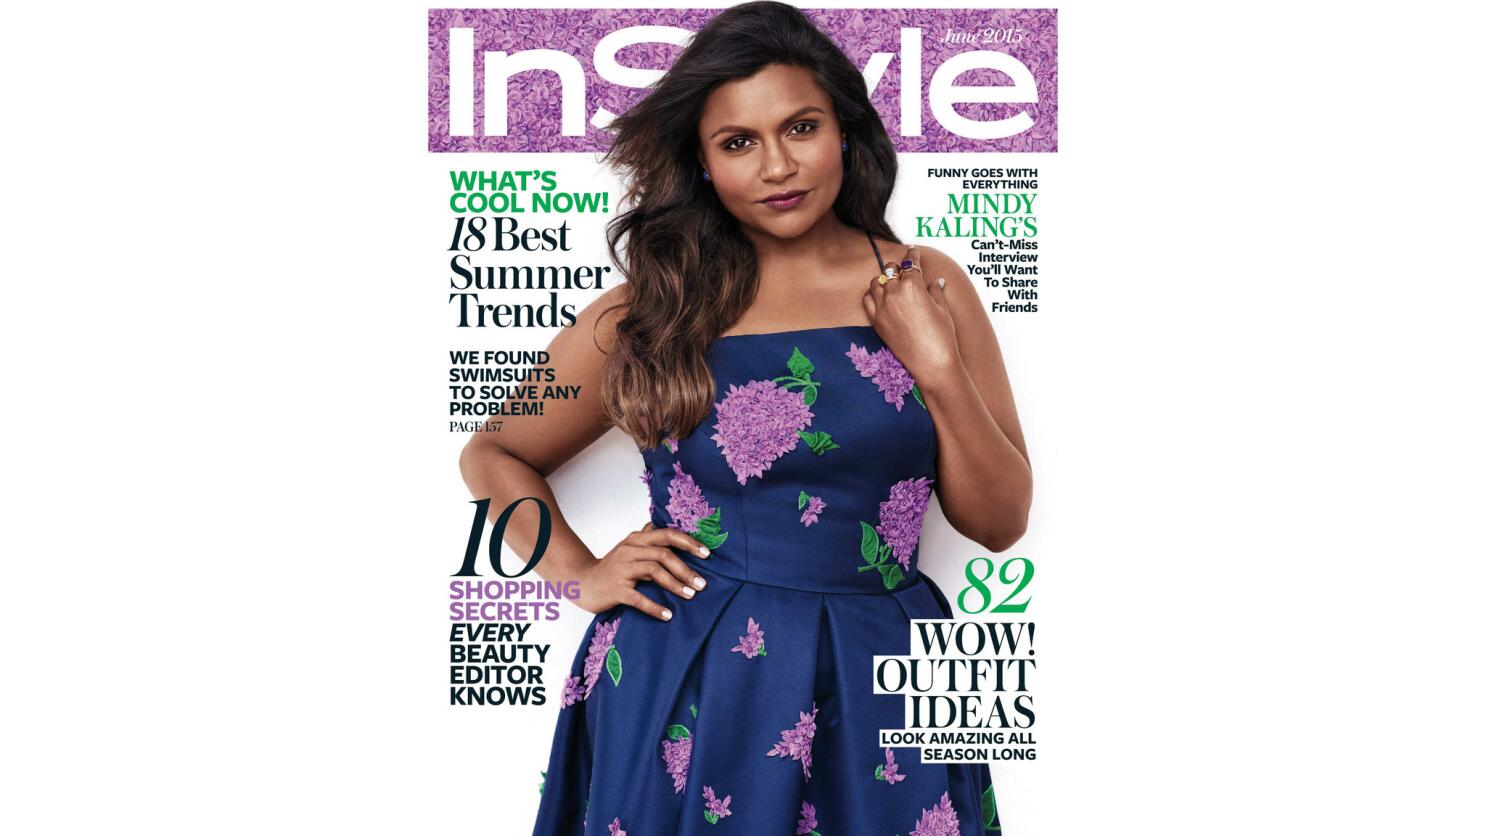 Mindy Kaling's 'Perfect Vacation Dress' Is a Navy Maxi Dress